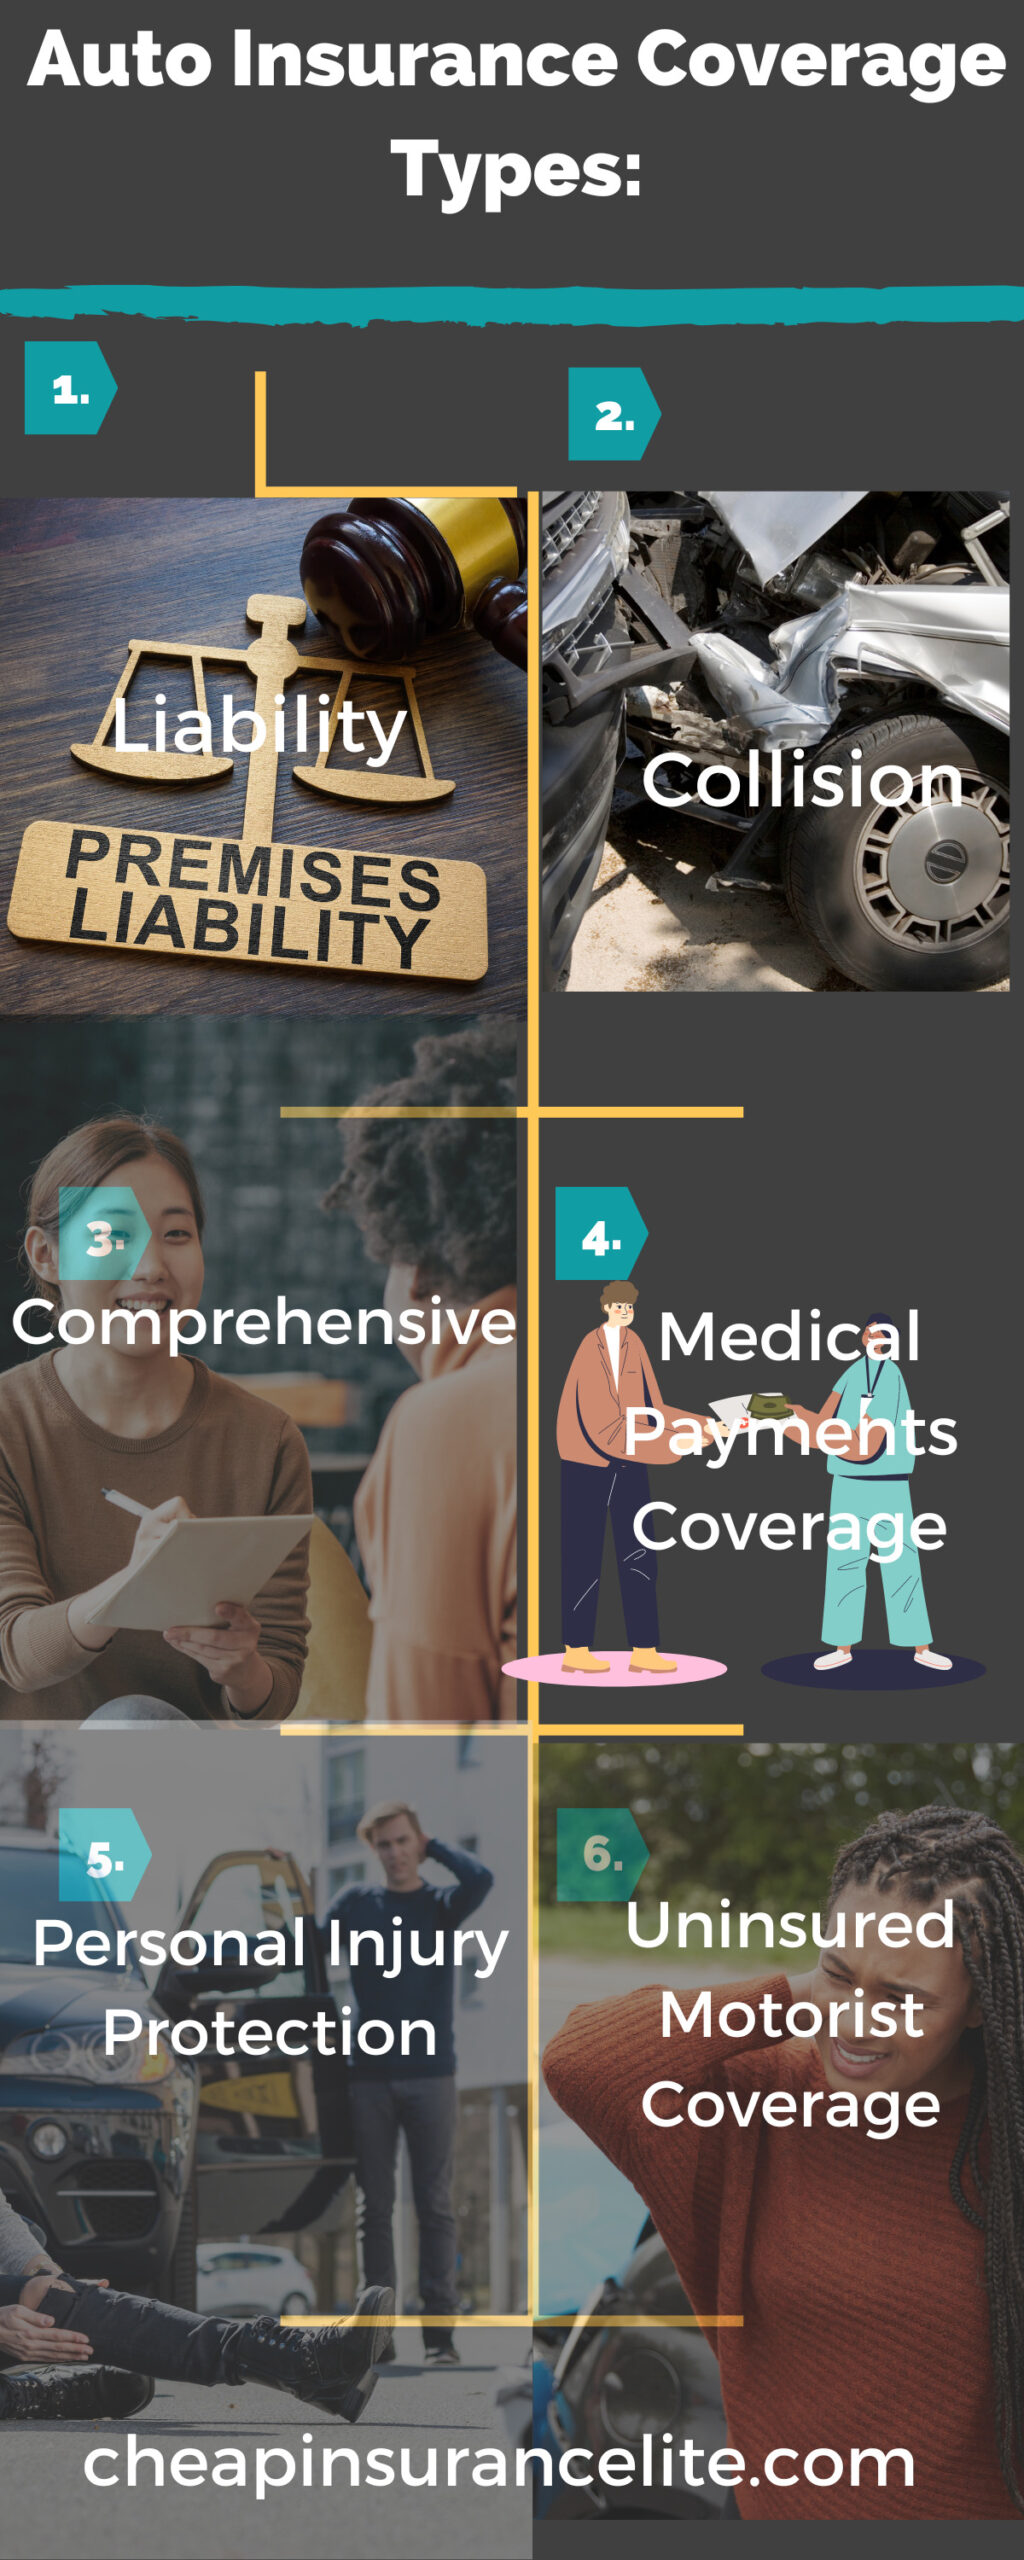 An infographic for Auto Insurance Coverage Types